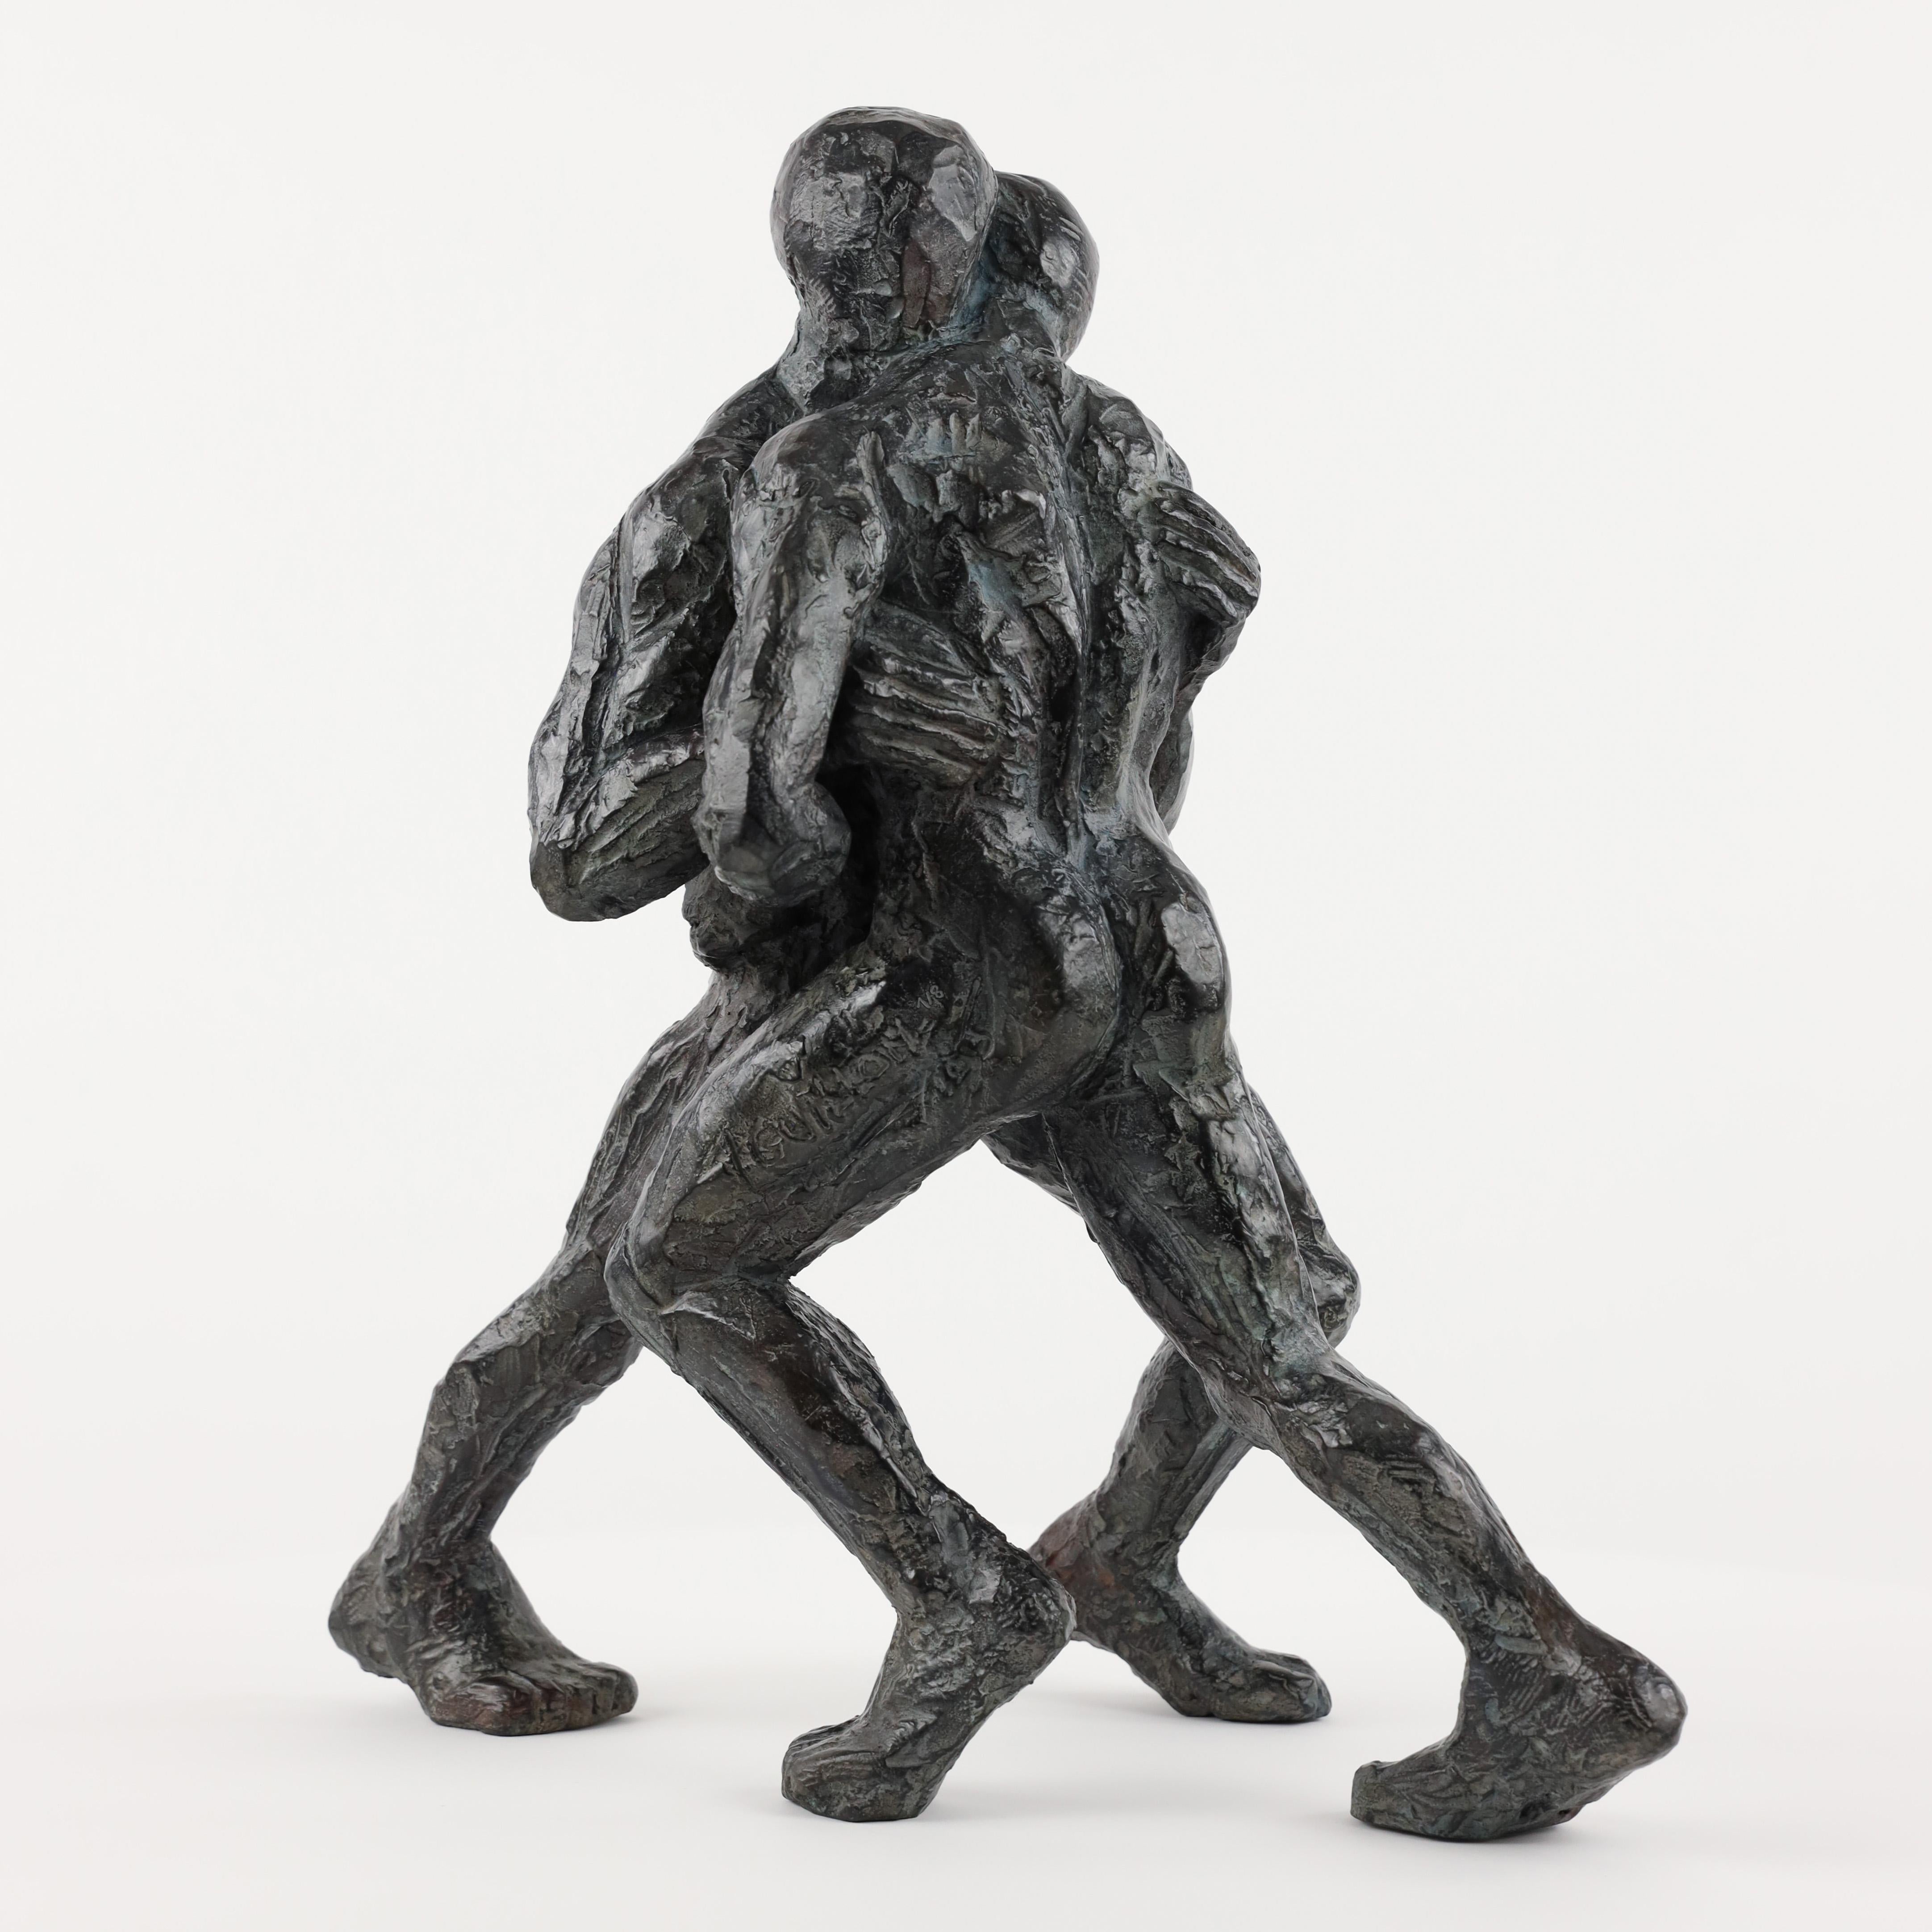 Wrestler VIII is a bronze sculpture by French contemporary artist Yann Guillon, dimensions are 47 × 44 × 29 cm (18.5 × 17.3 × 11.4 in). 
This sculpture is signed and numbered, it is part of a limited edition of 8 editions + 4 artist’s proofs, and